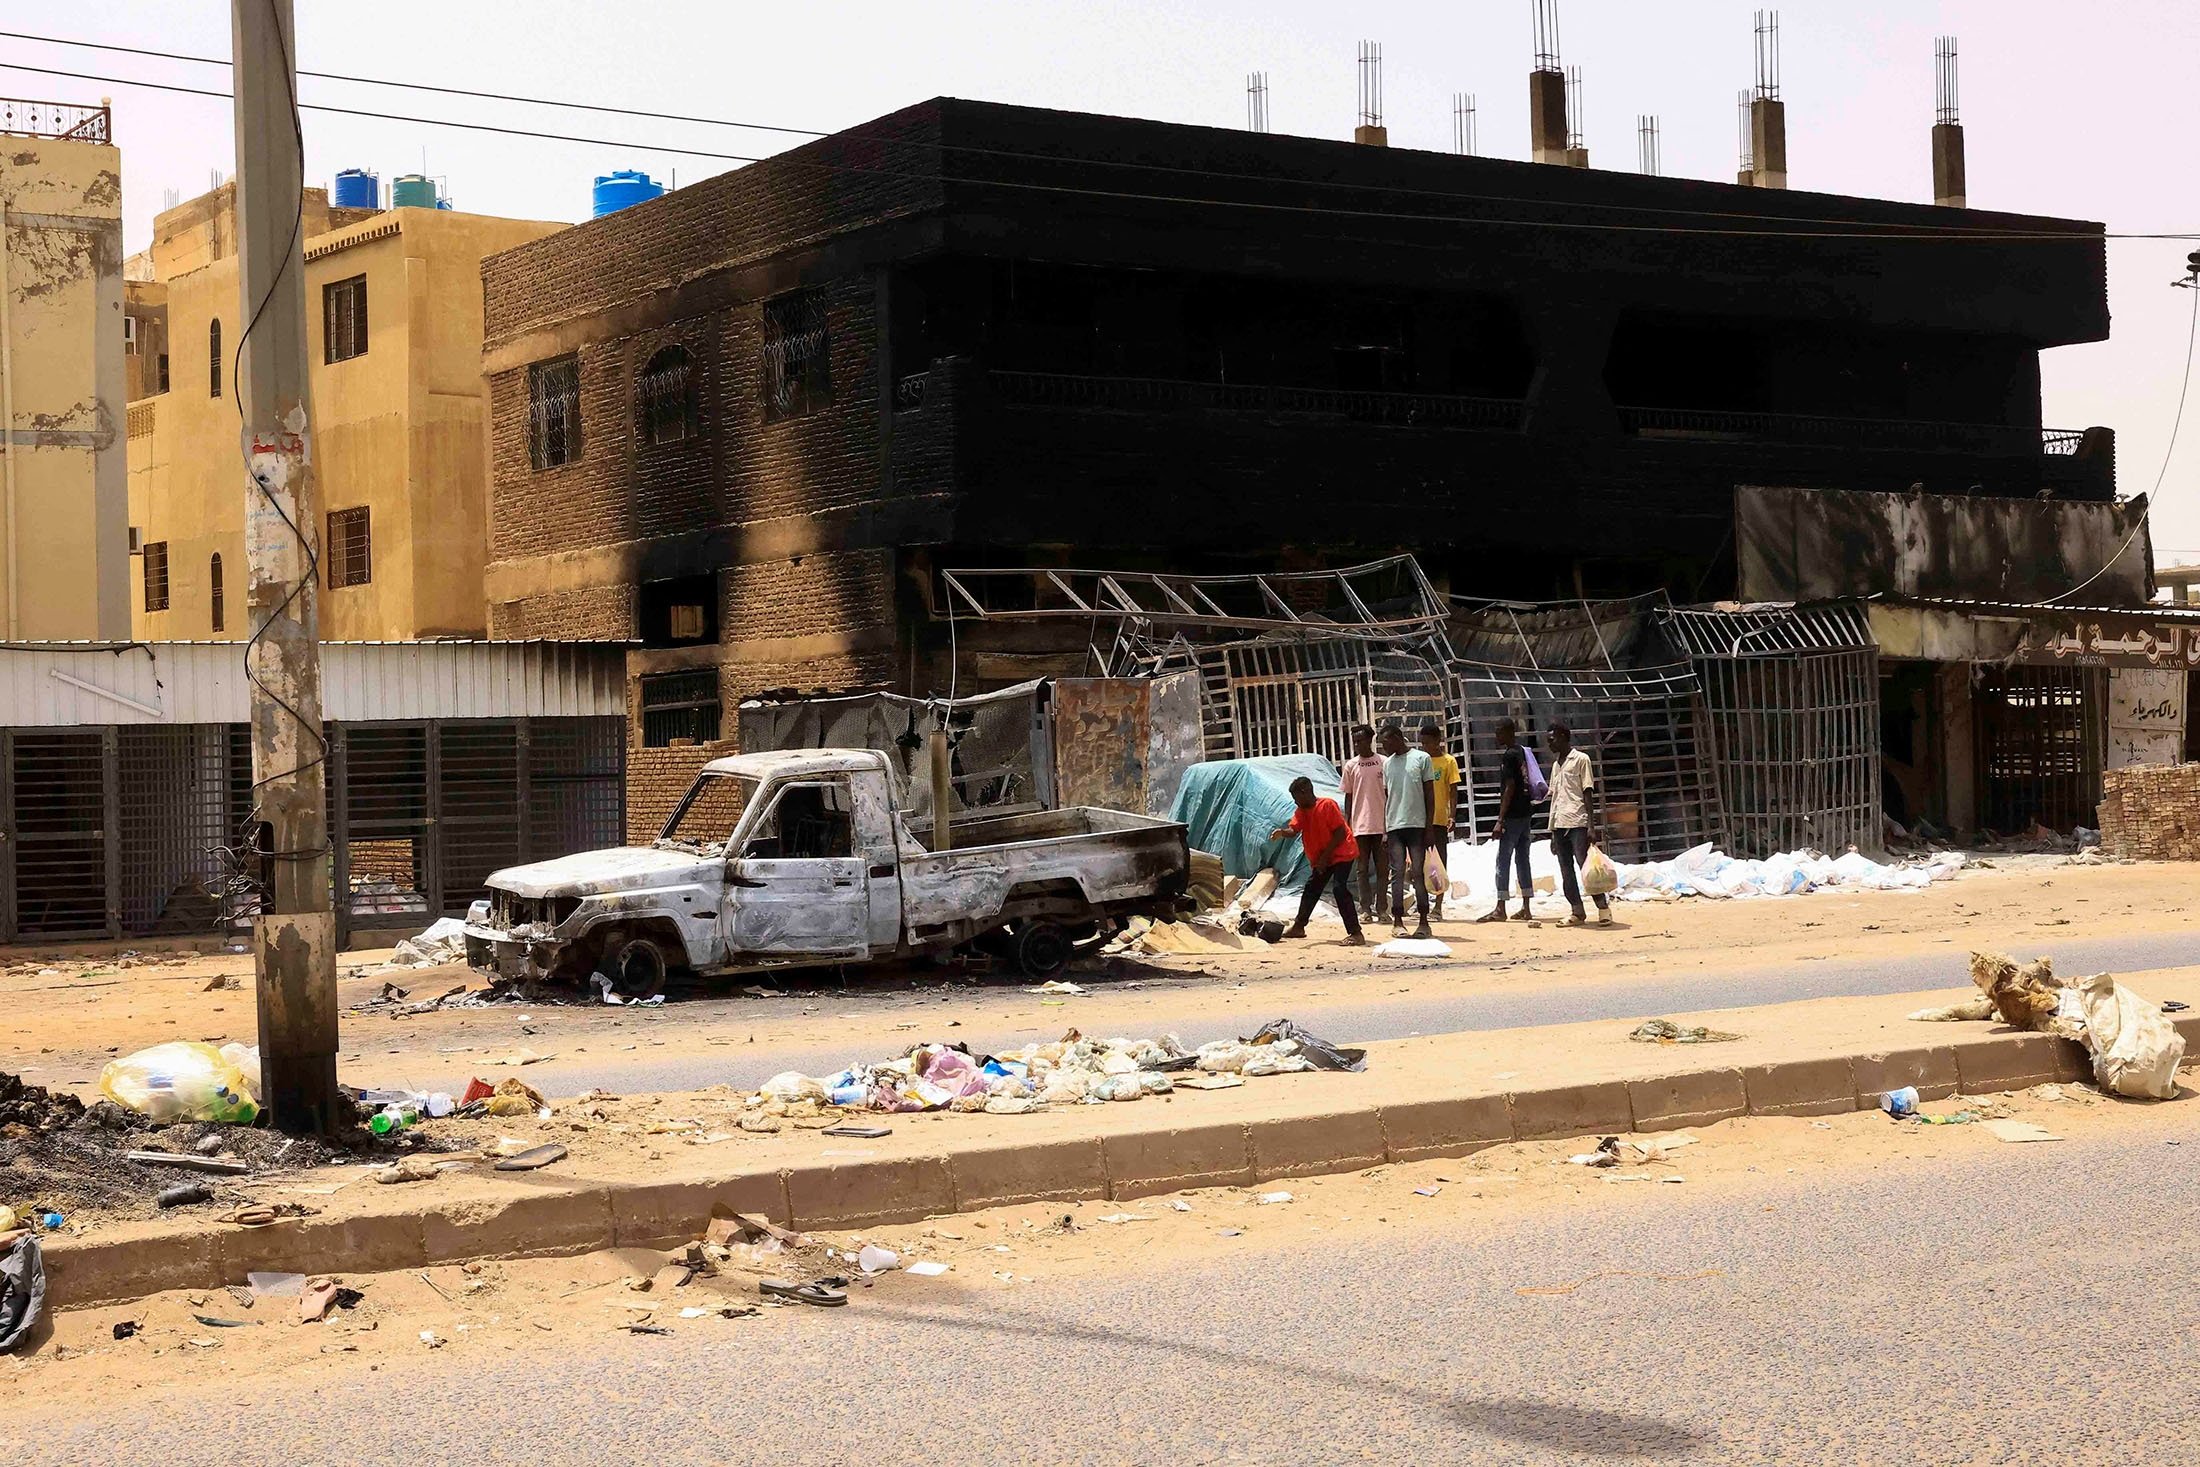 People walk near damaged car and buildings at the central market during clashes between the paramilitary Rapid Support Forces and the army in Khartoum, Sudan, April 27, 2023. (Reuters Photo)